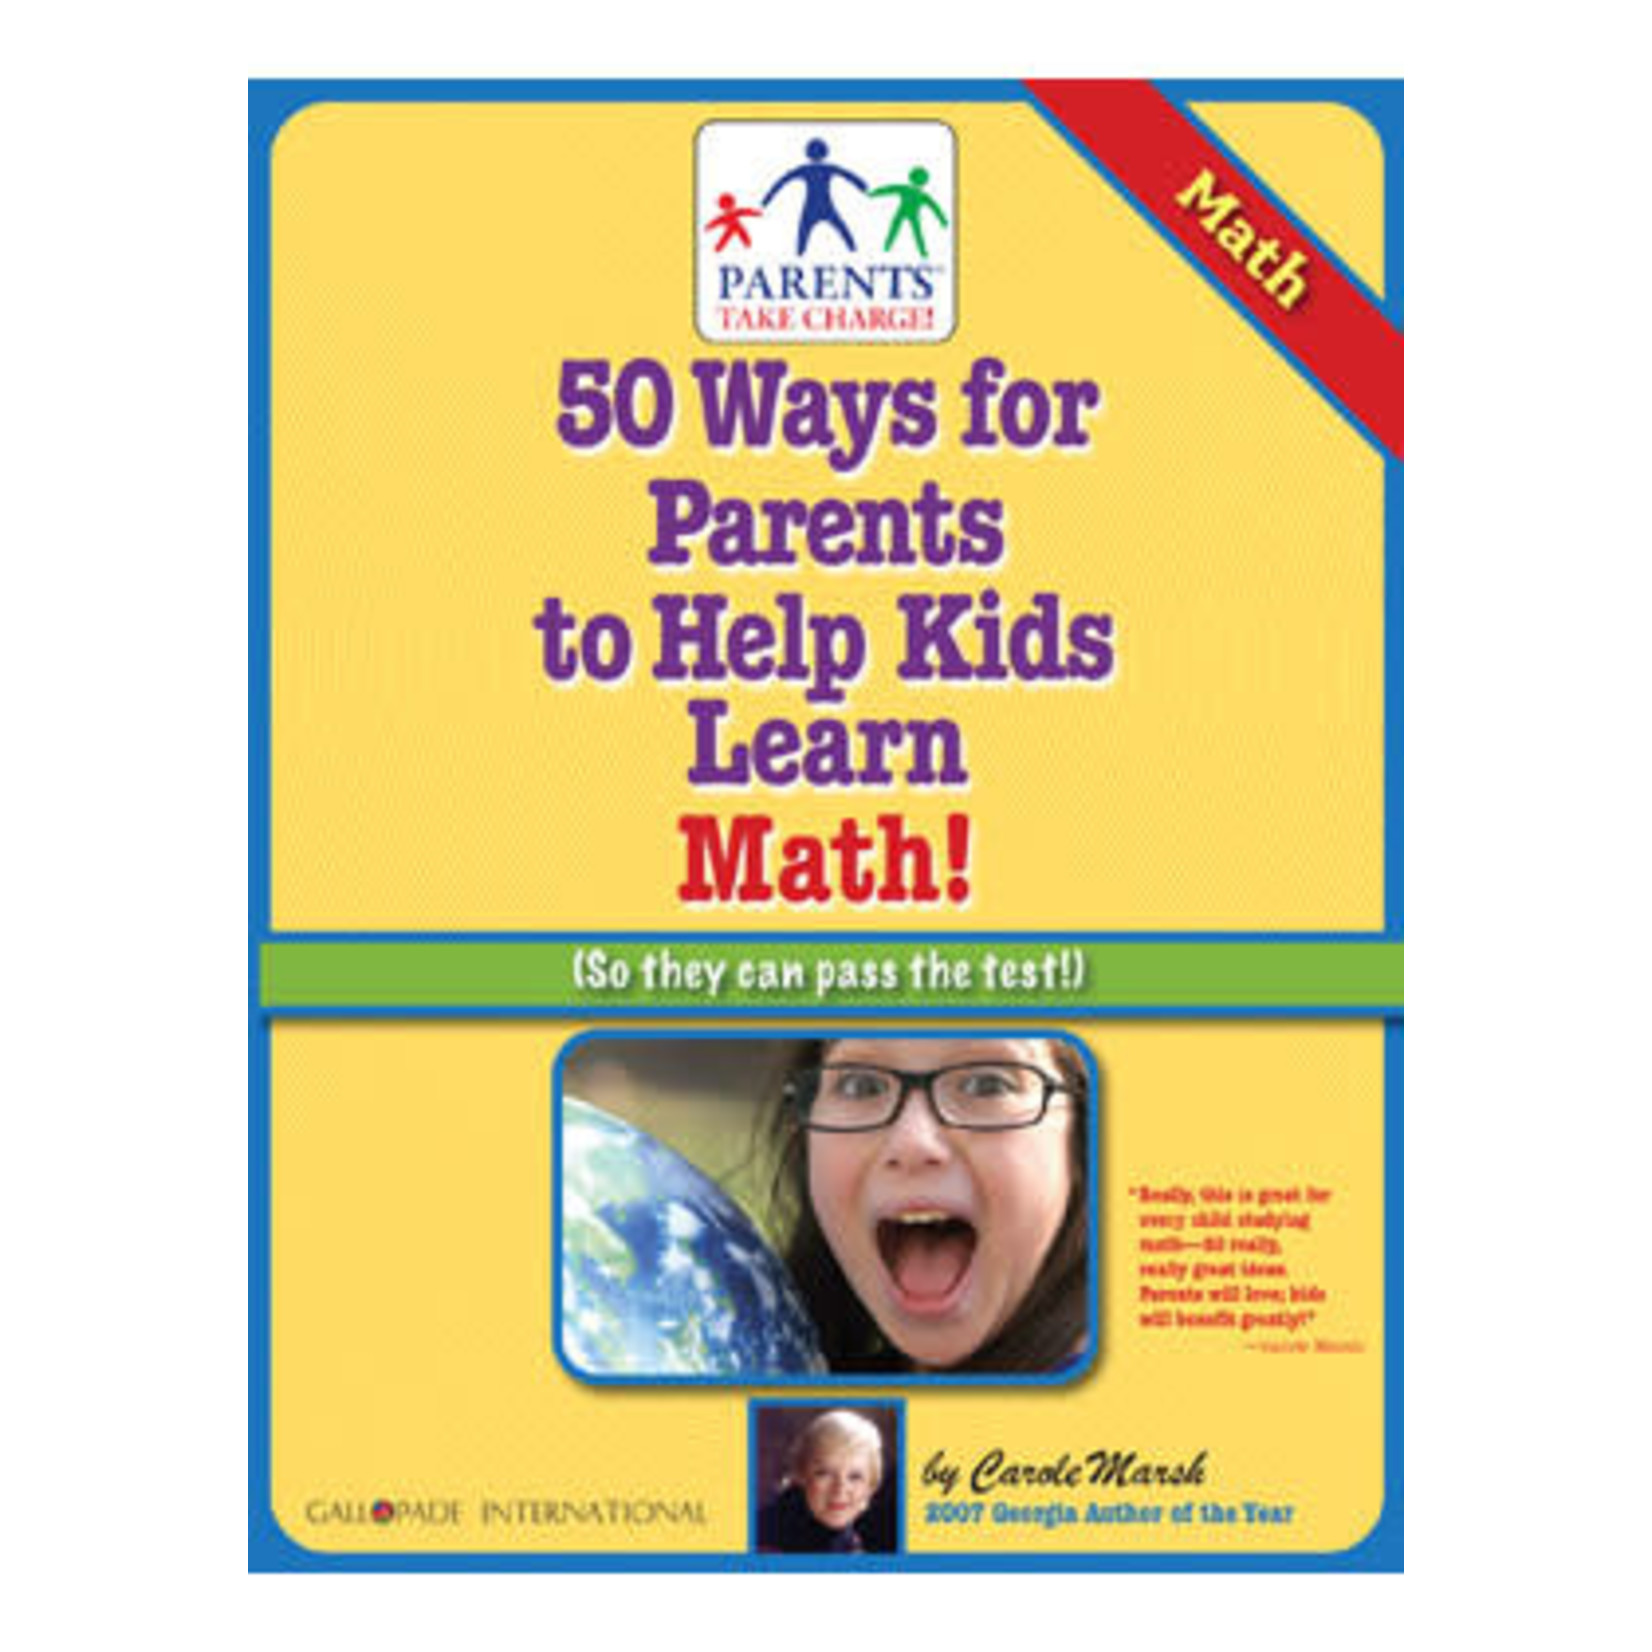 50 Ways for Parents to Help Kids Learn Math!